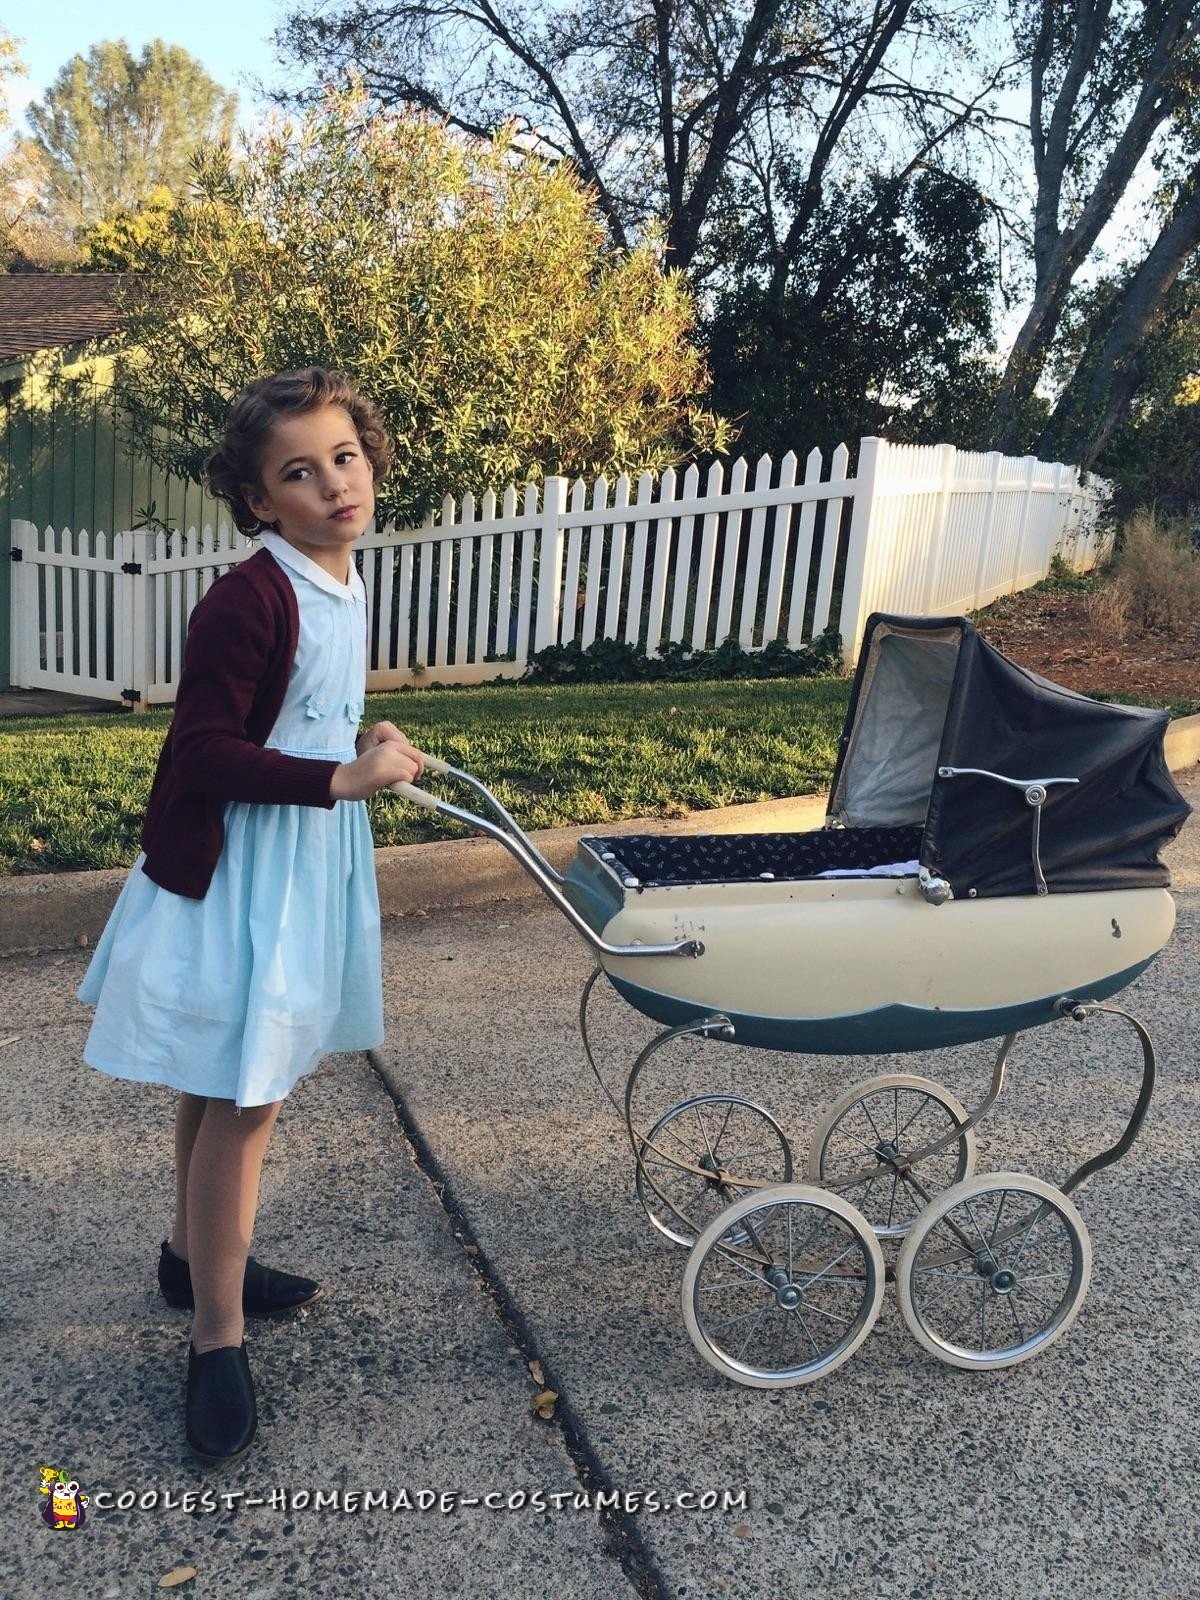 Jenny Costume from Call the Midwife